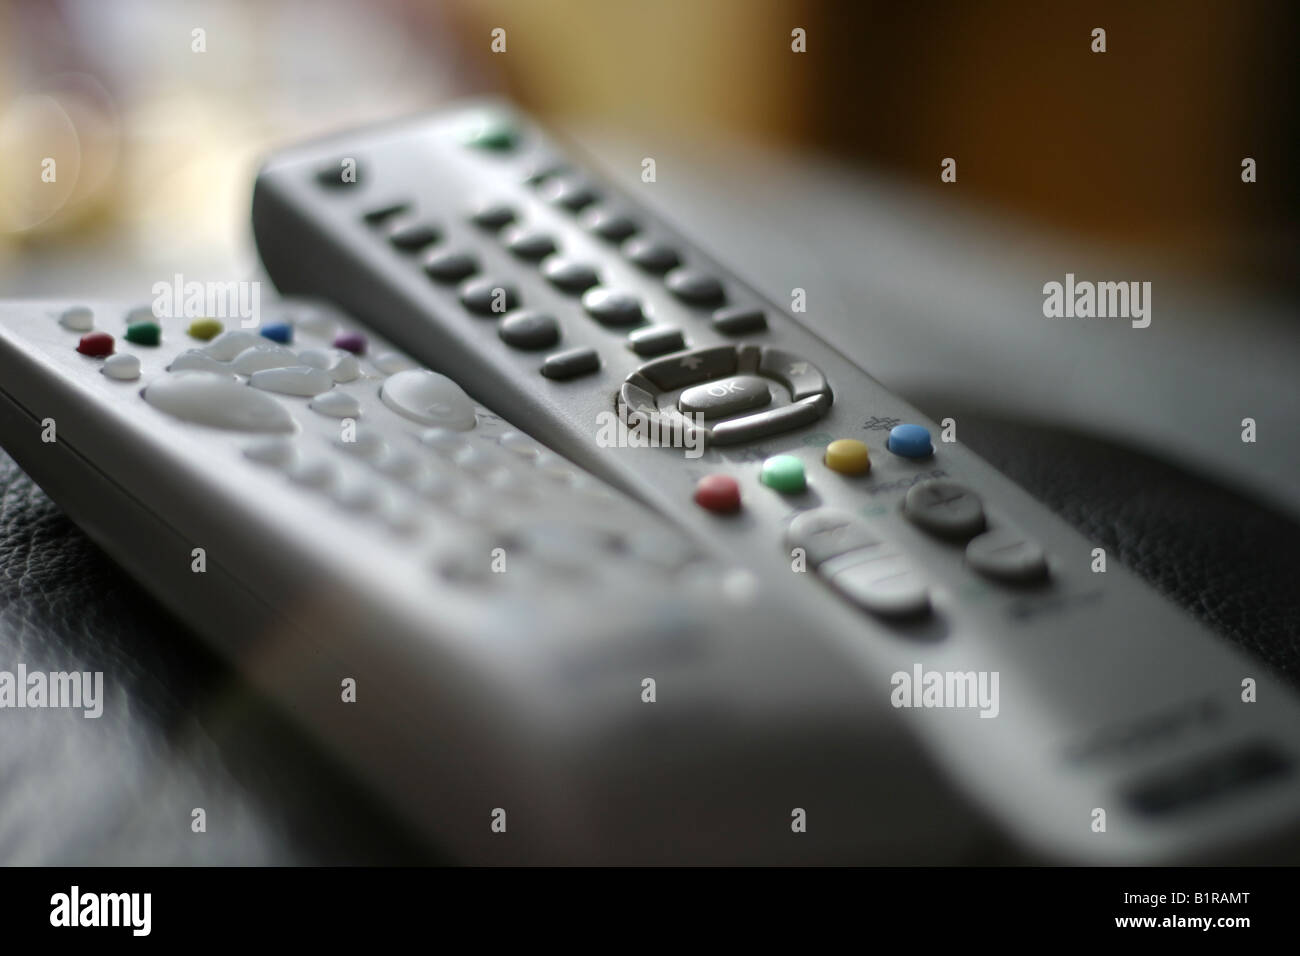 two remotes resting Stock Photo